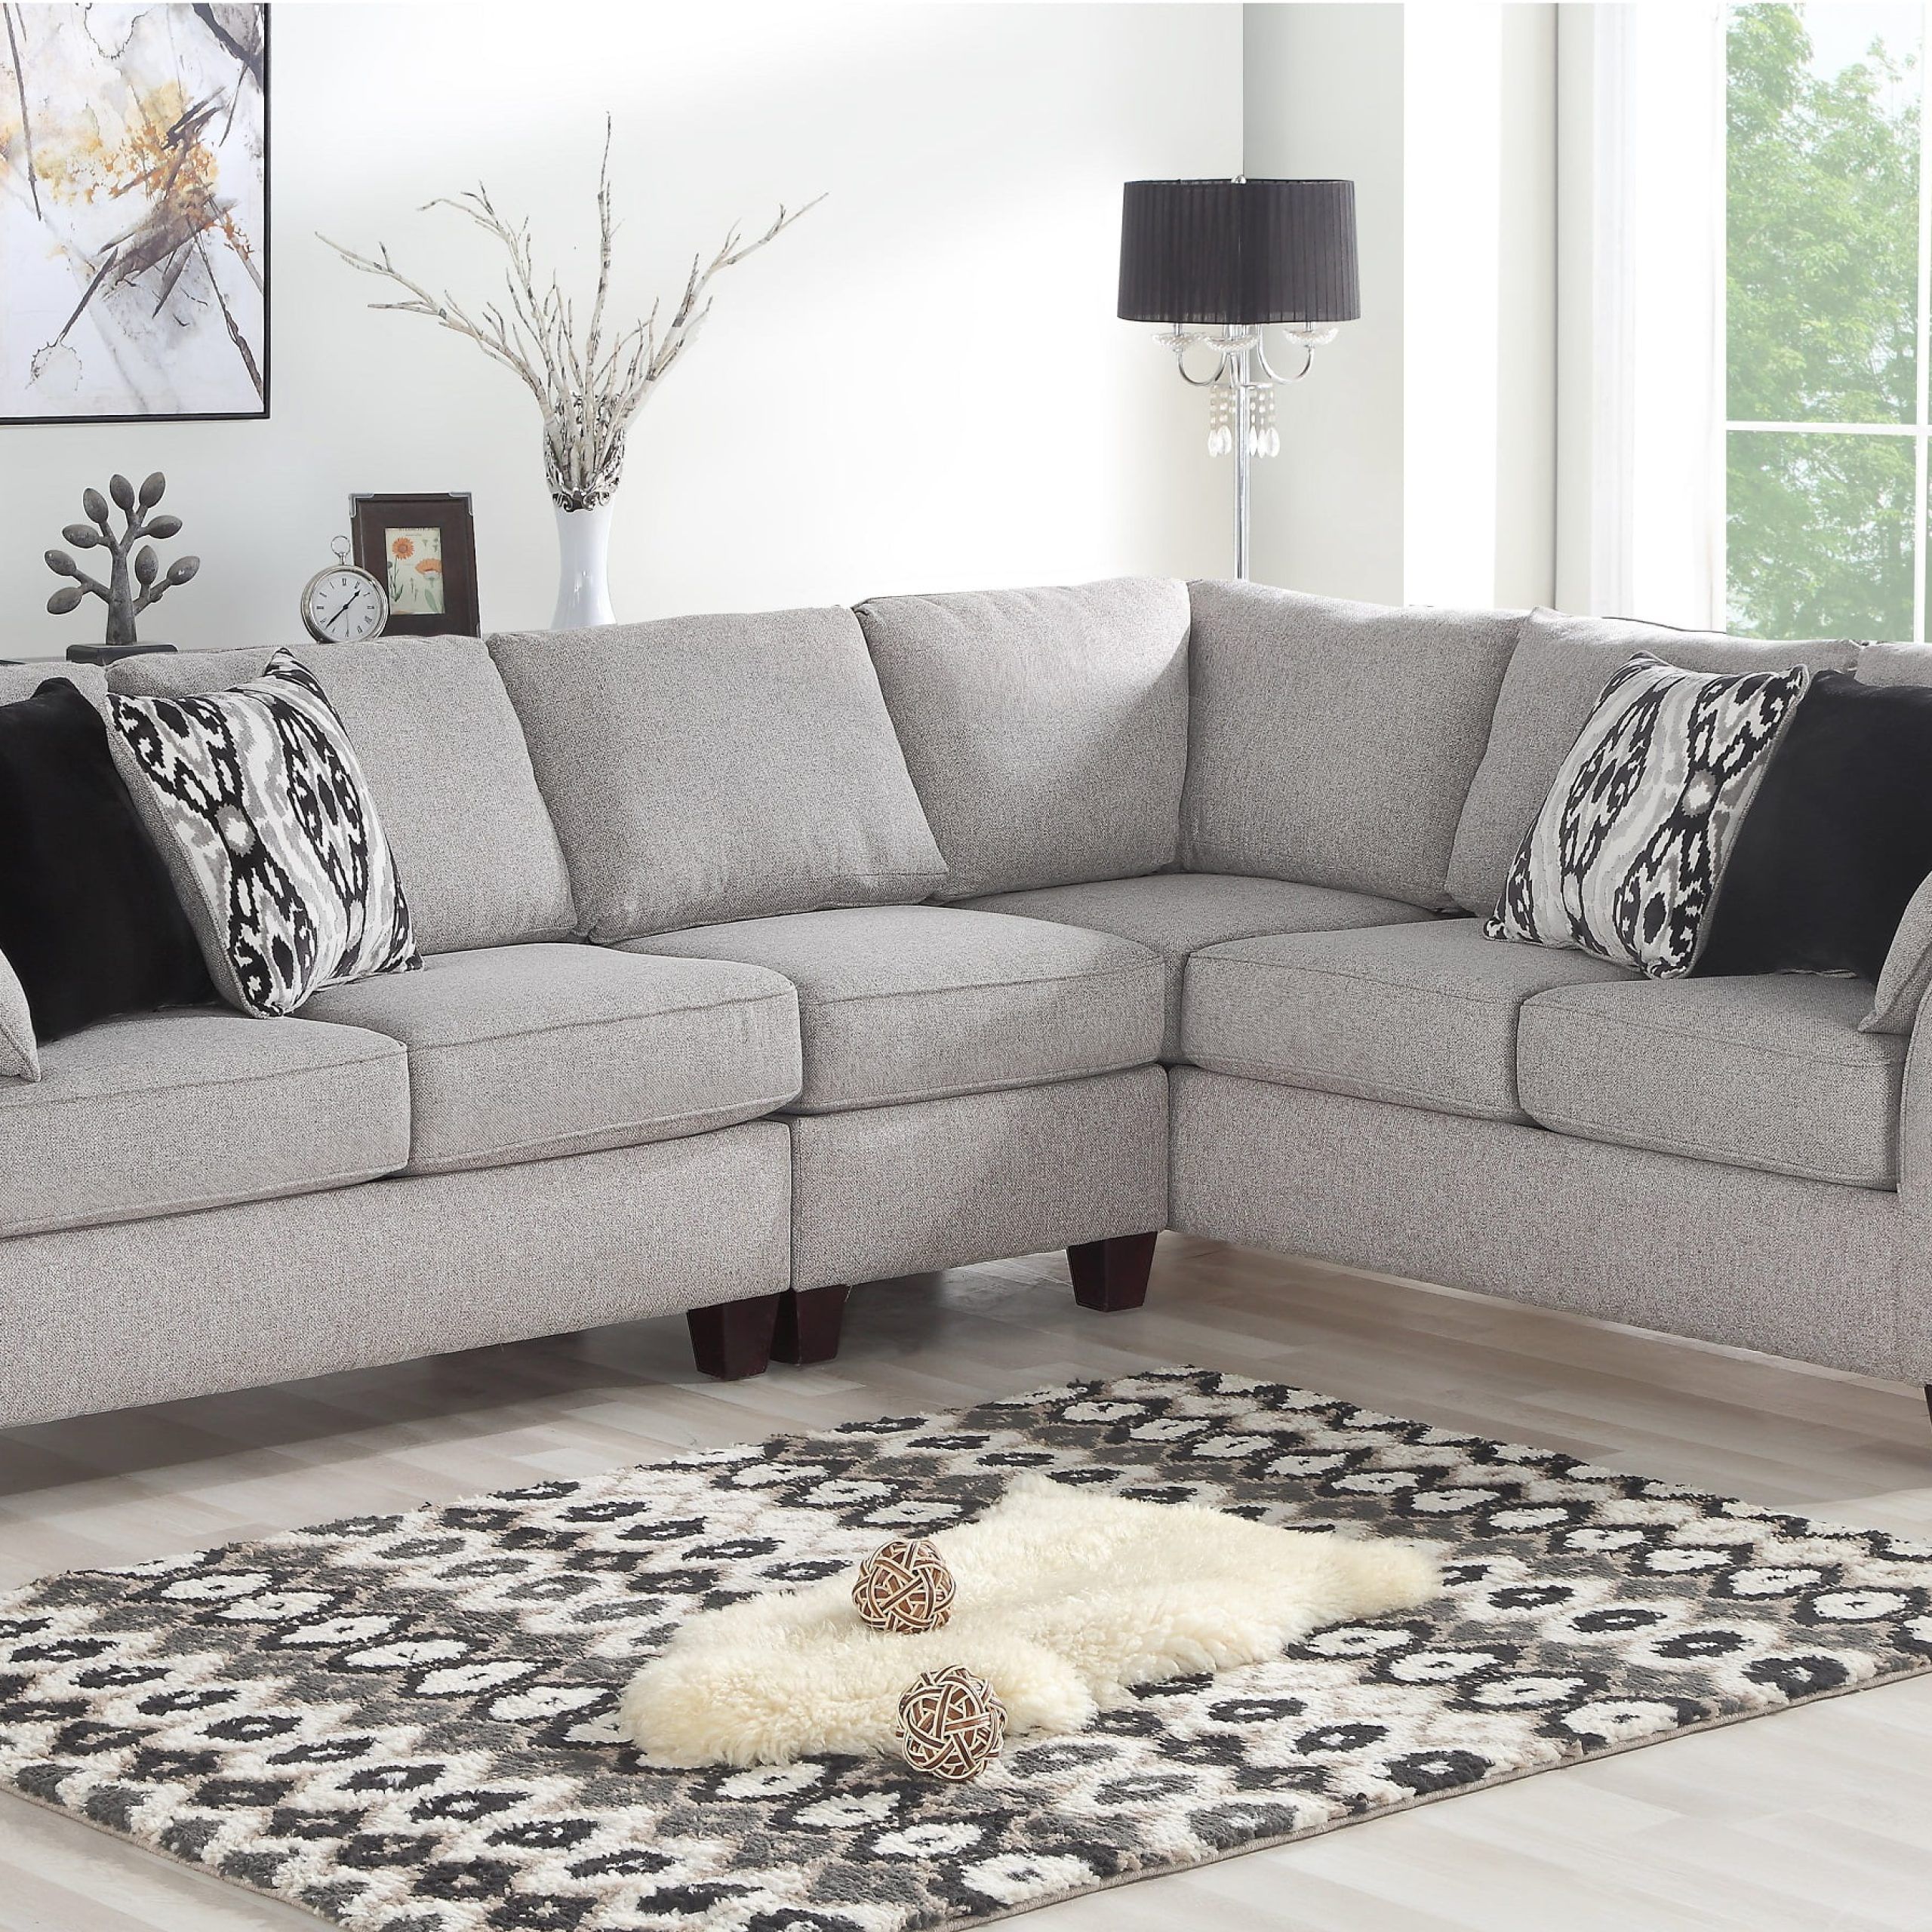 Living Room Furniture Beautiful Look Family Seating 3pc Sectional Sofa In Sofas For Living Rooms (View 11 of 20)